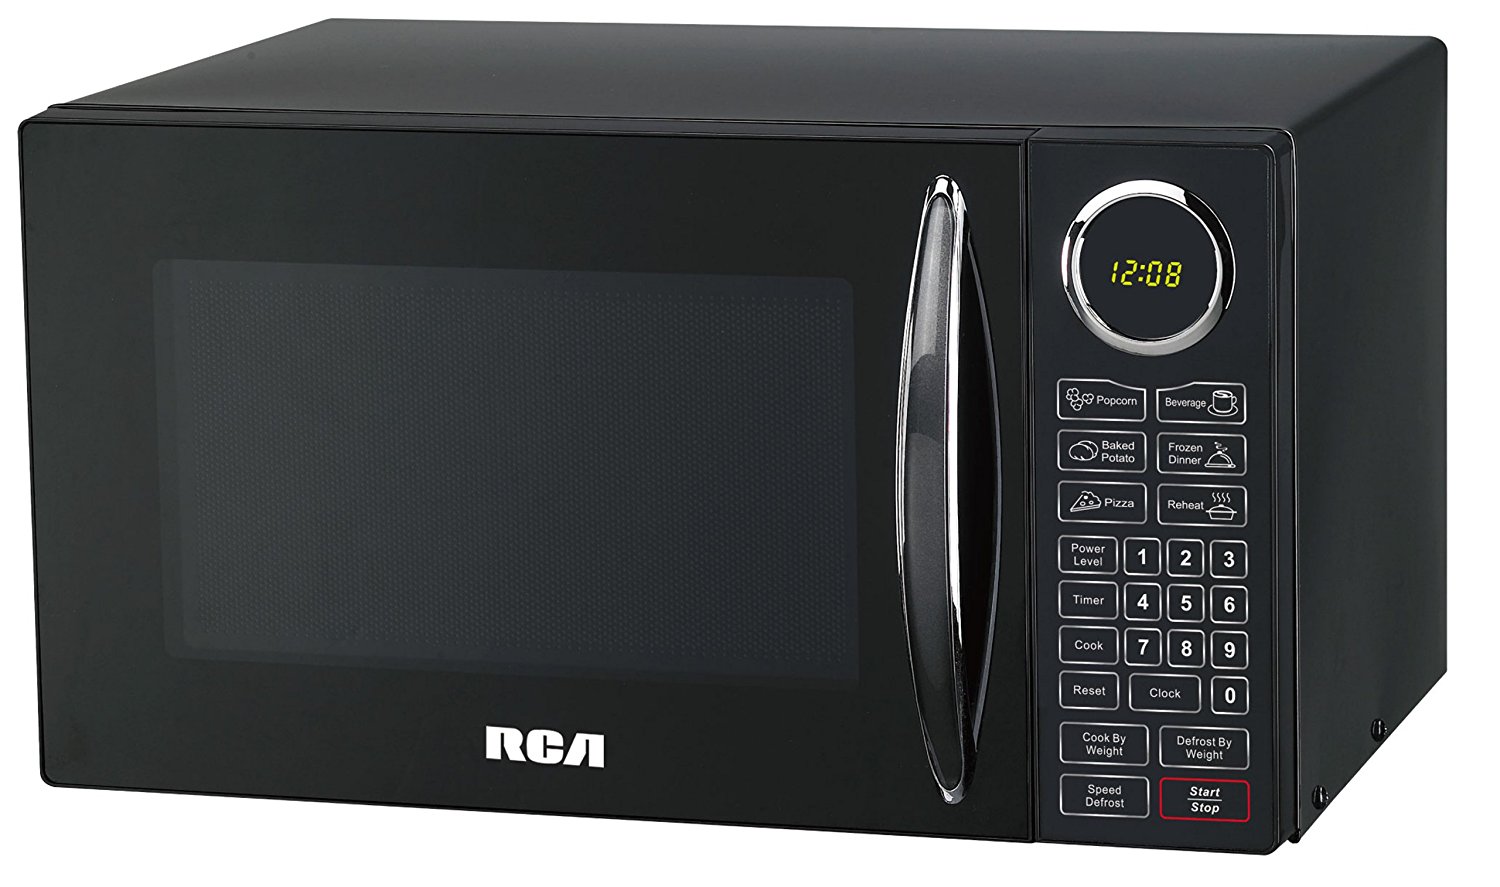 RCA 0.9 Cubic Feet Microwave Oven, Black